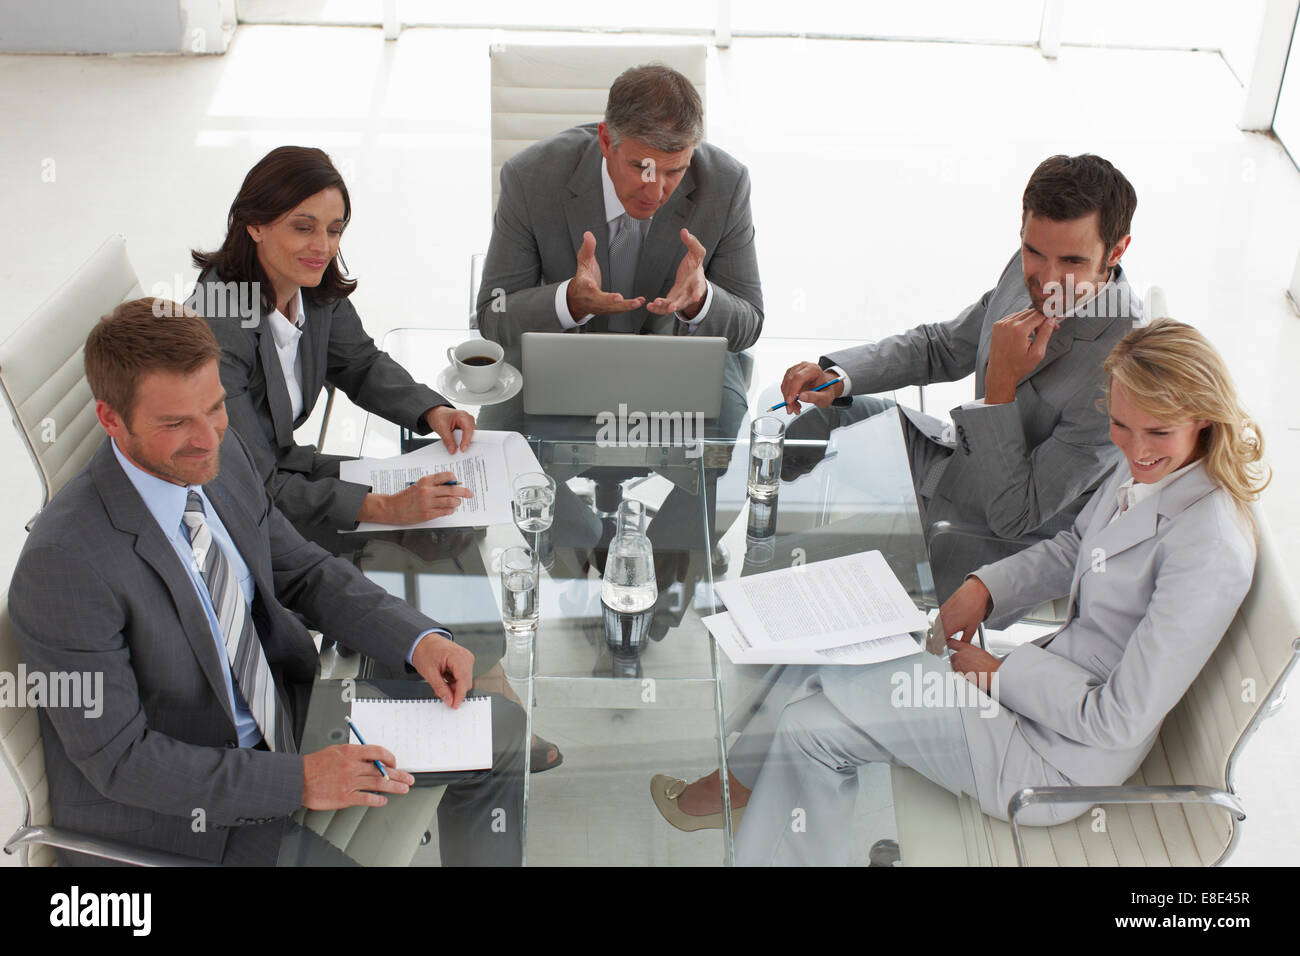 Man speaking at a meeting Stock Photo